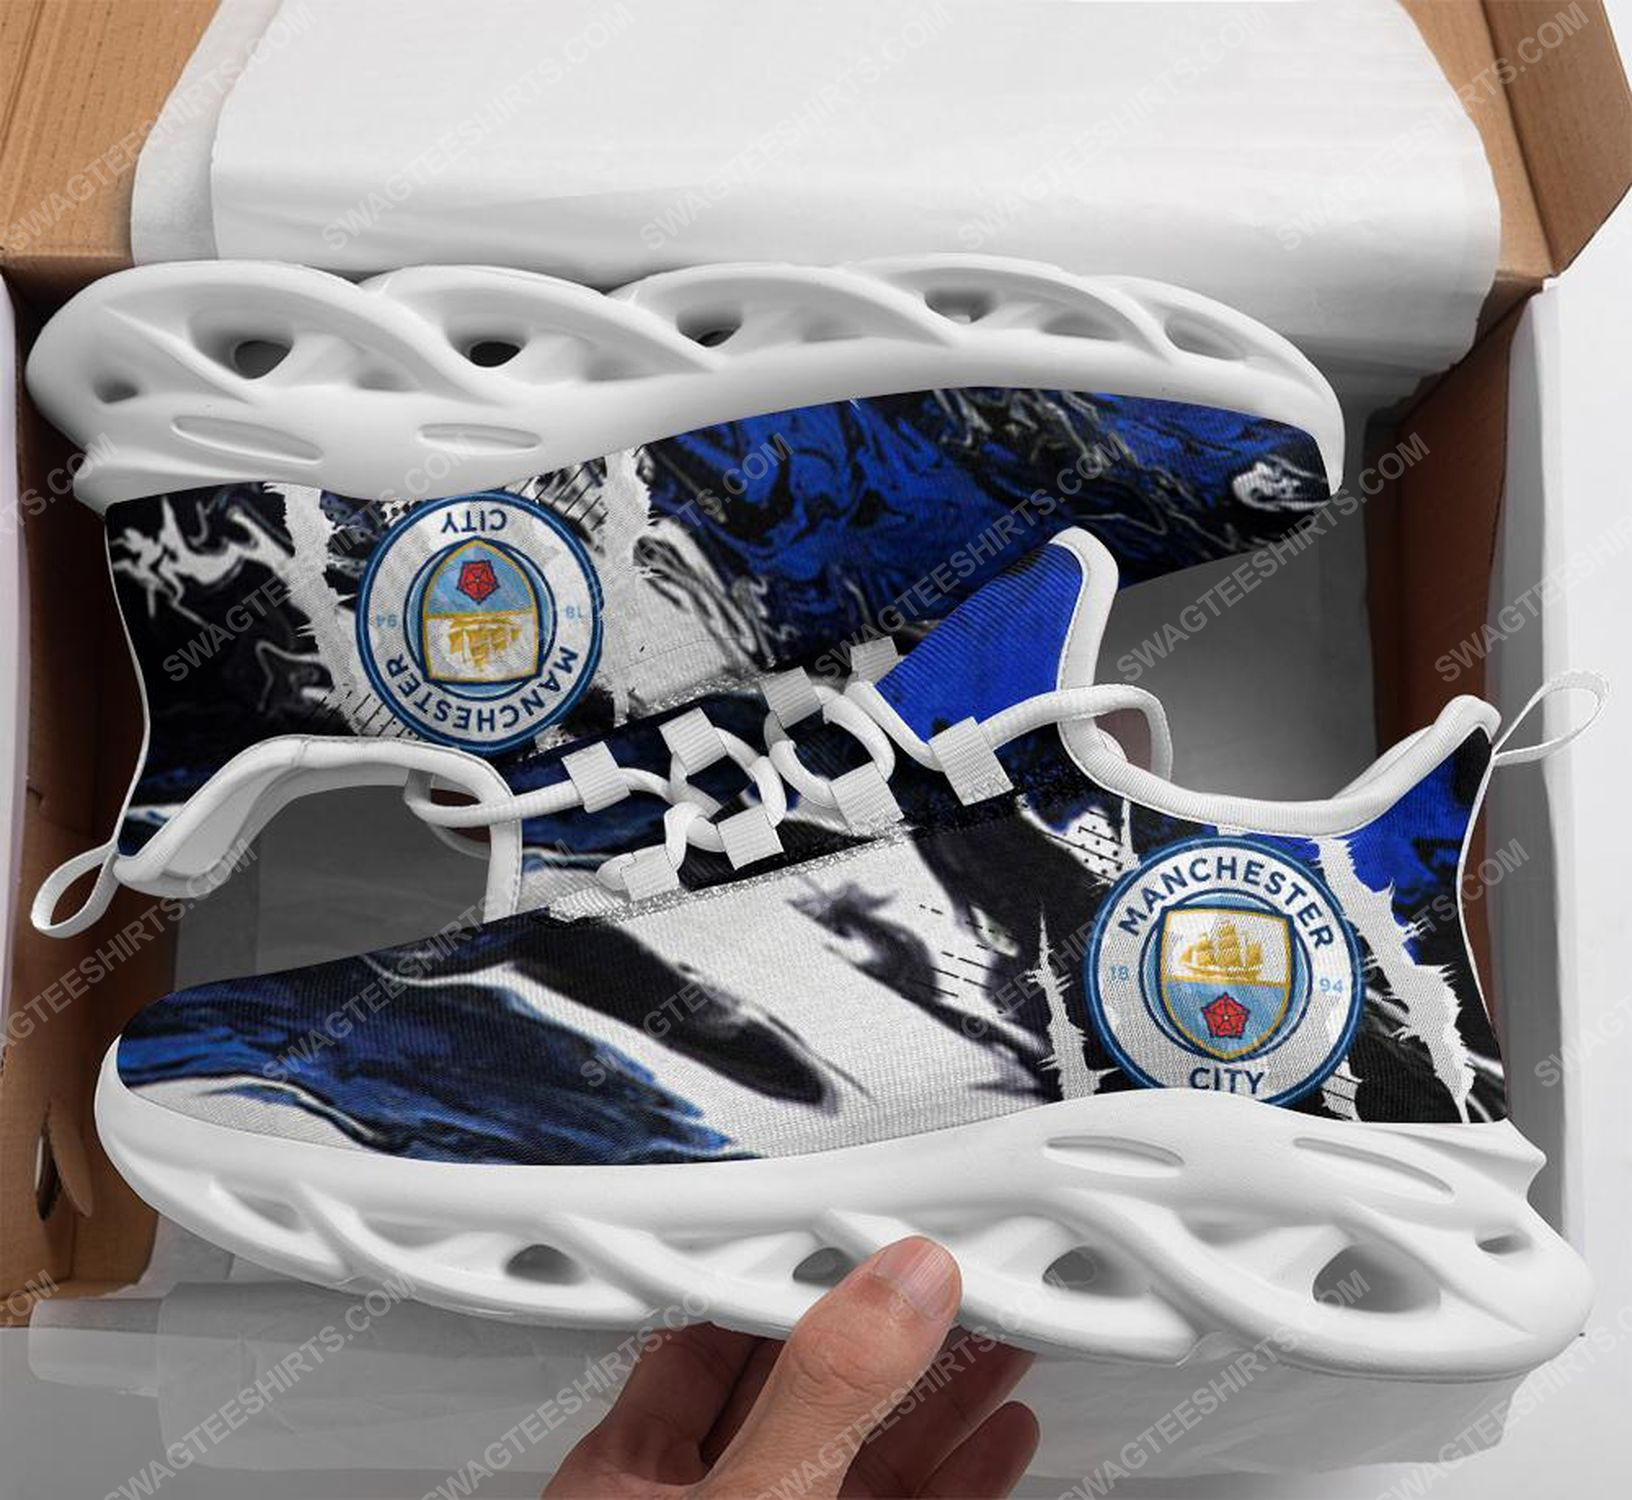 [special edition] The manchester city football club max soul shoes – Maria